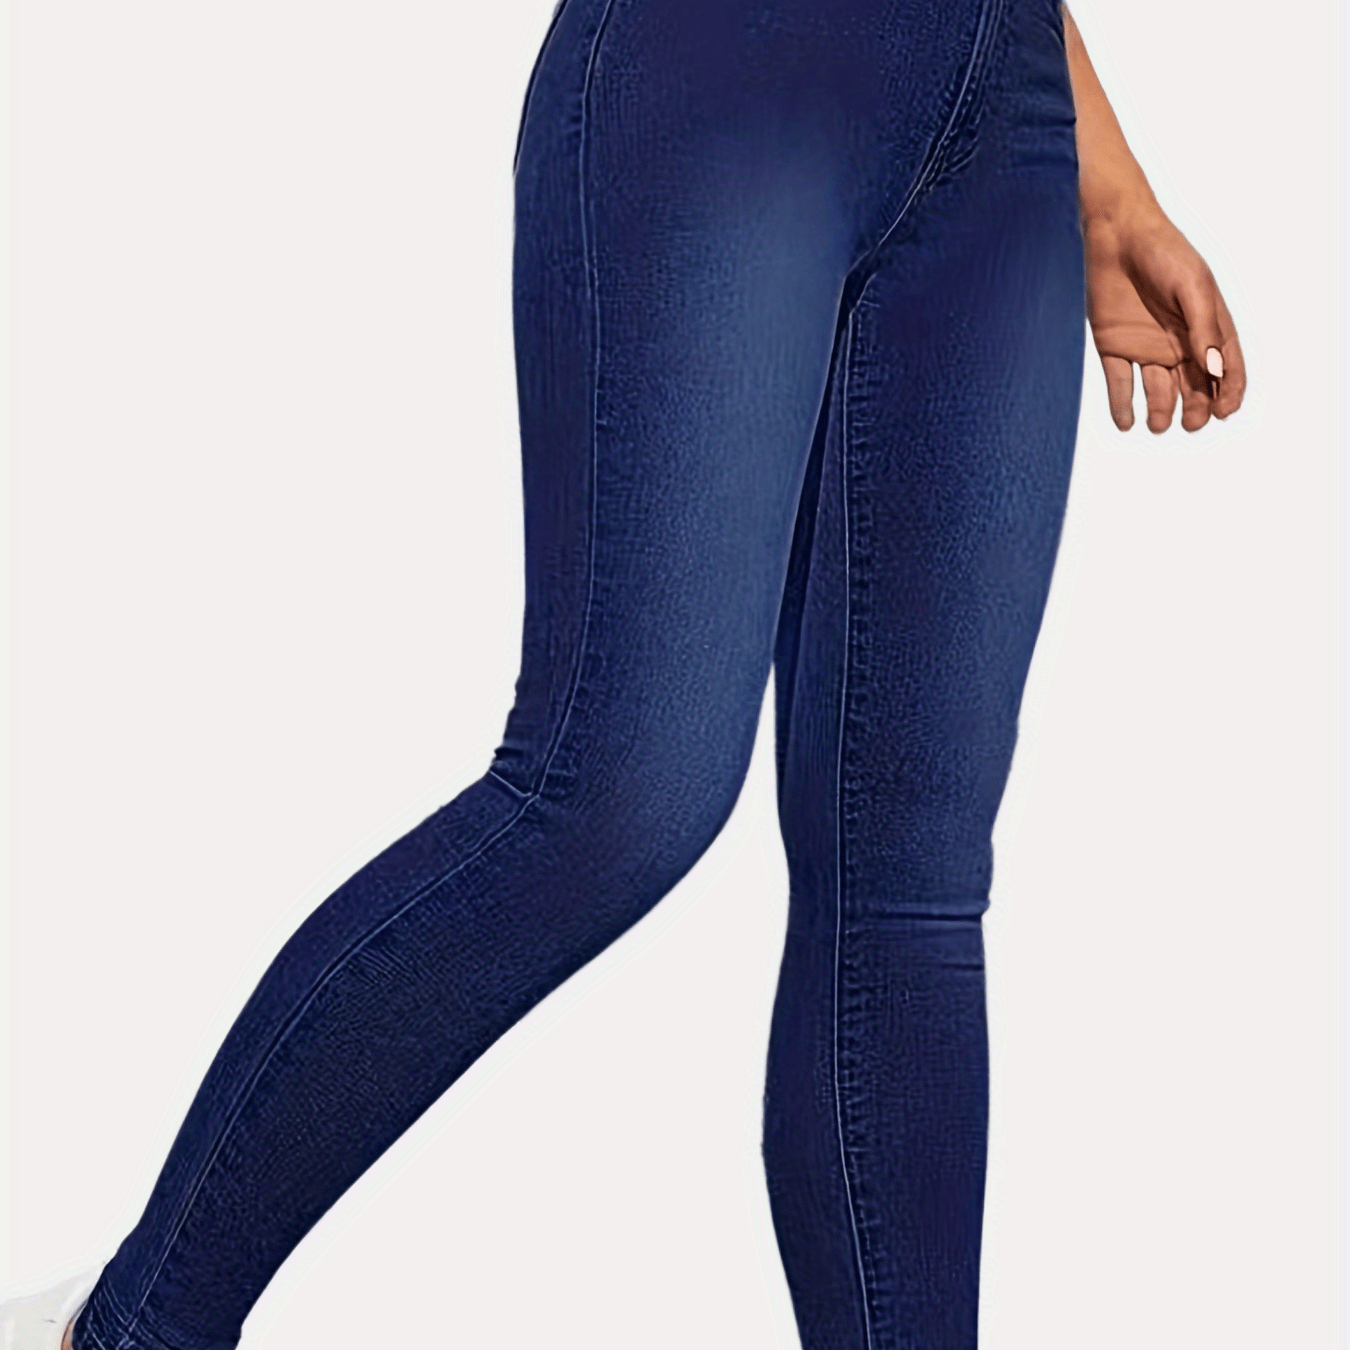 

High Rise Solid Color Skinny Jeans, High Stretch Zipper Button Closure Sexy Denim Pants, Trendy Pants For Every Day, Women's Denim Jeans & Clothing